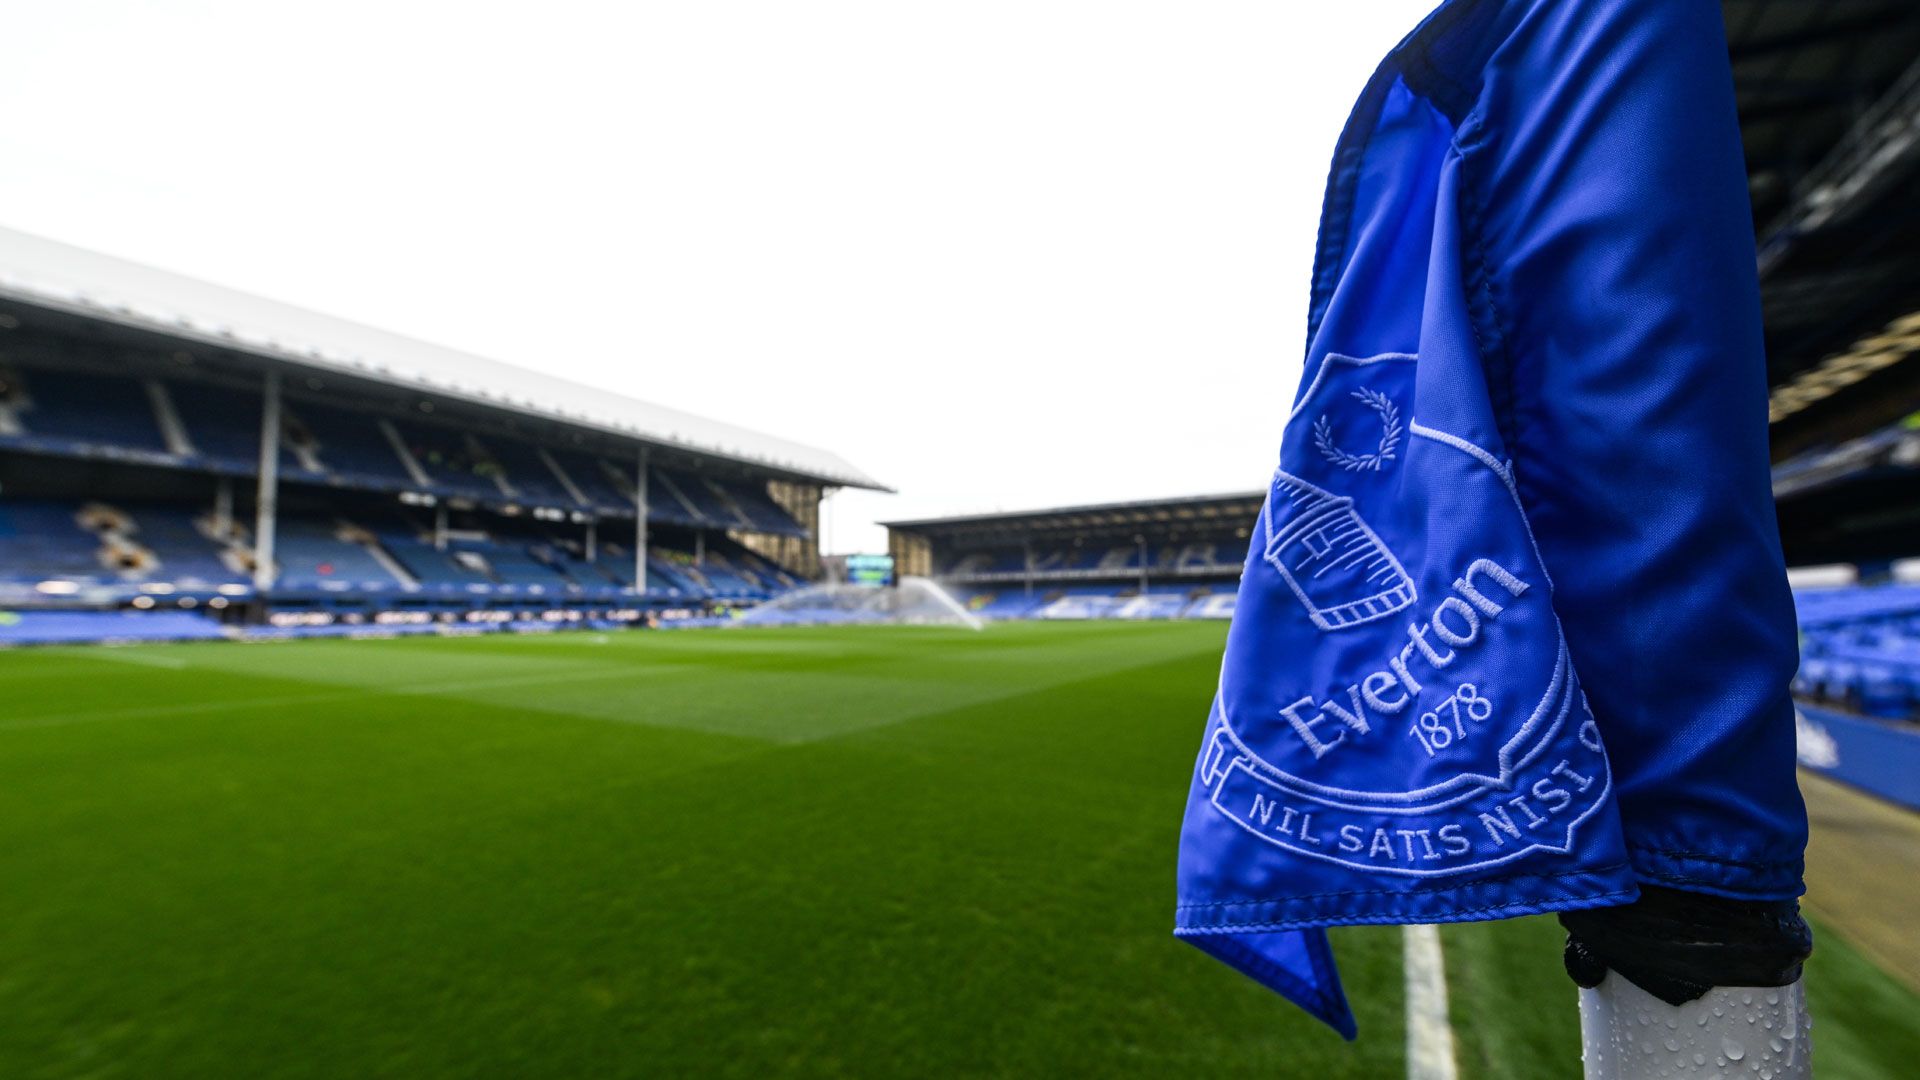 everton told they 'only care about corruption if it leads to them getting relegation' as fans react to toffees withdrawing appeal against second premier league points deduction